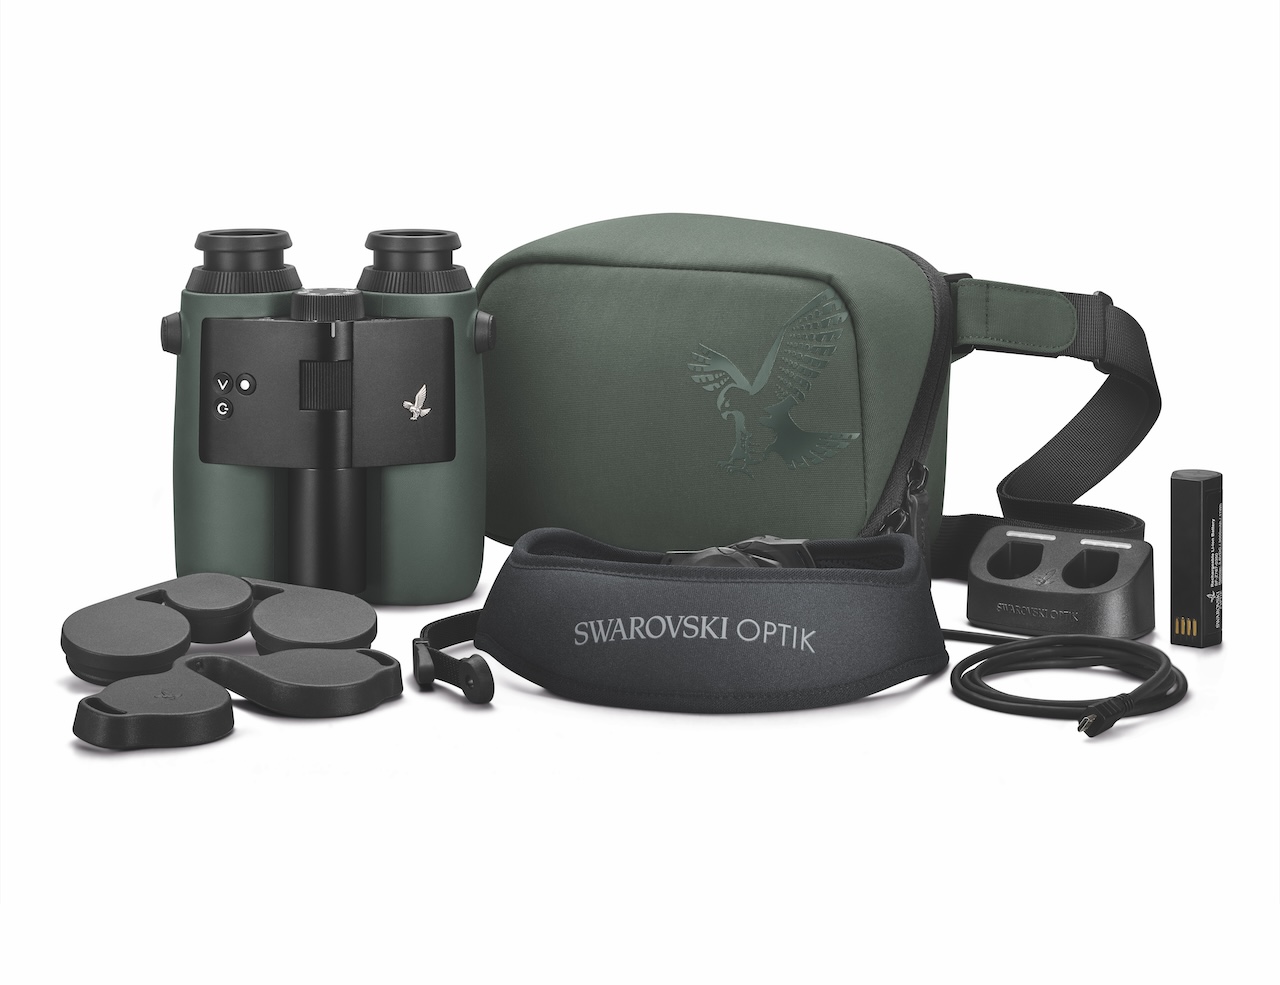 To mark the company’s 75th anniversary, Swarovski Optik has created the AX Visio, the world's first AI-supported binoculars.